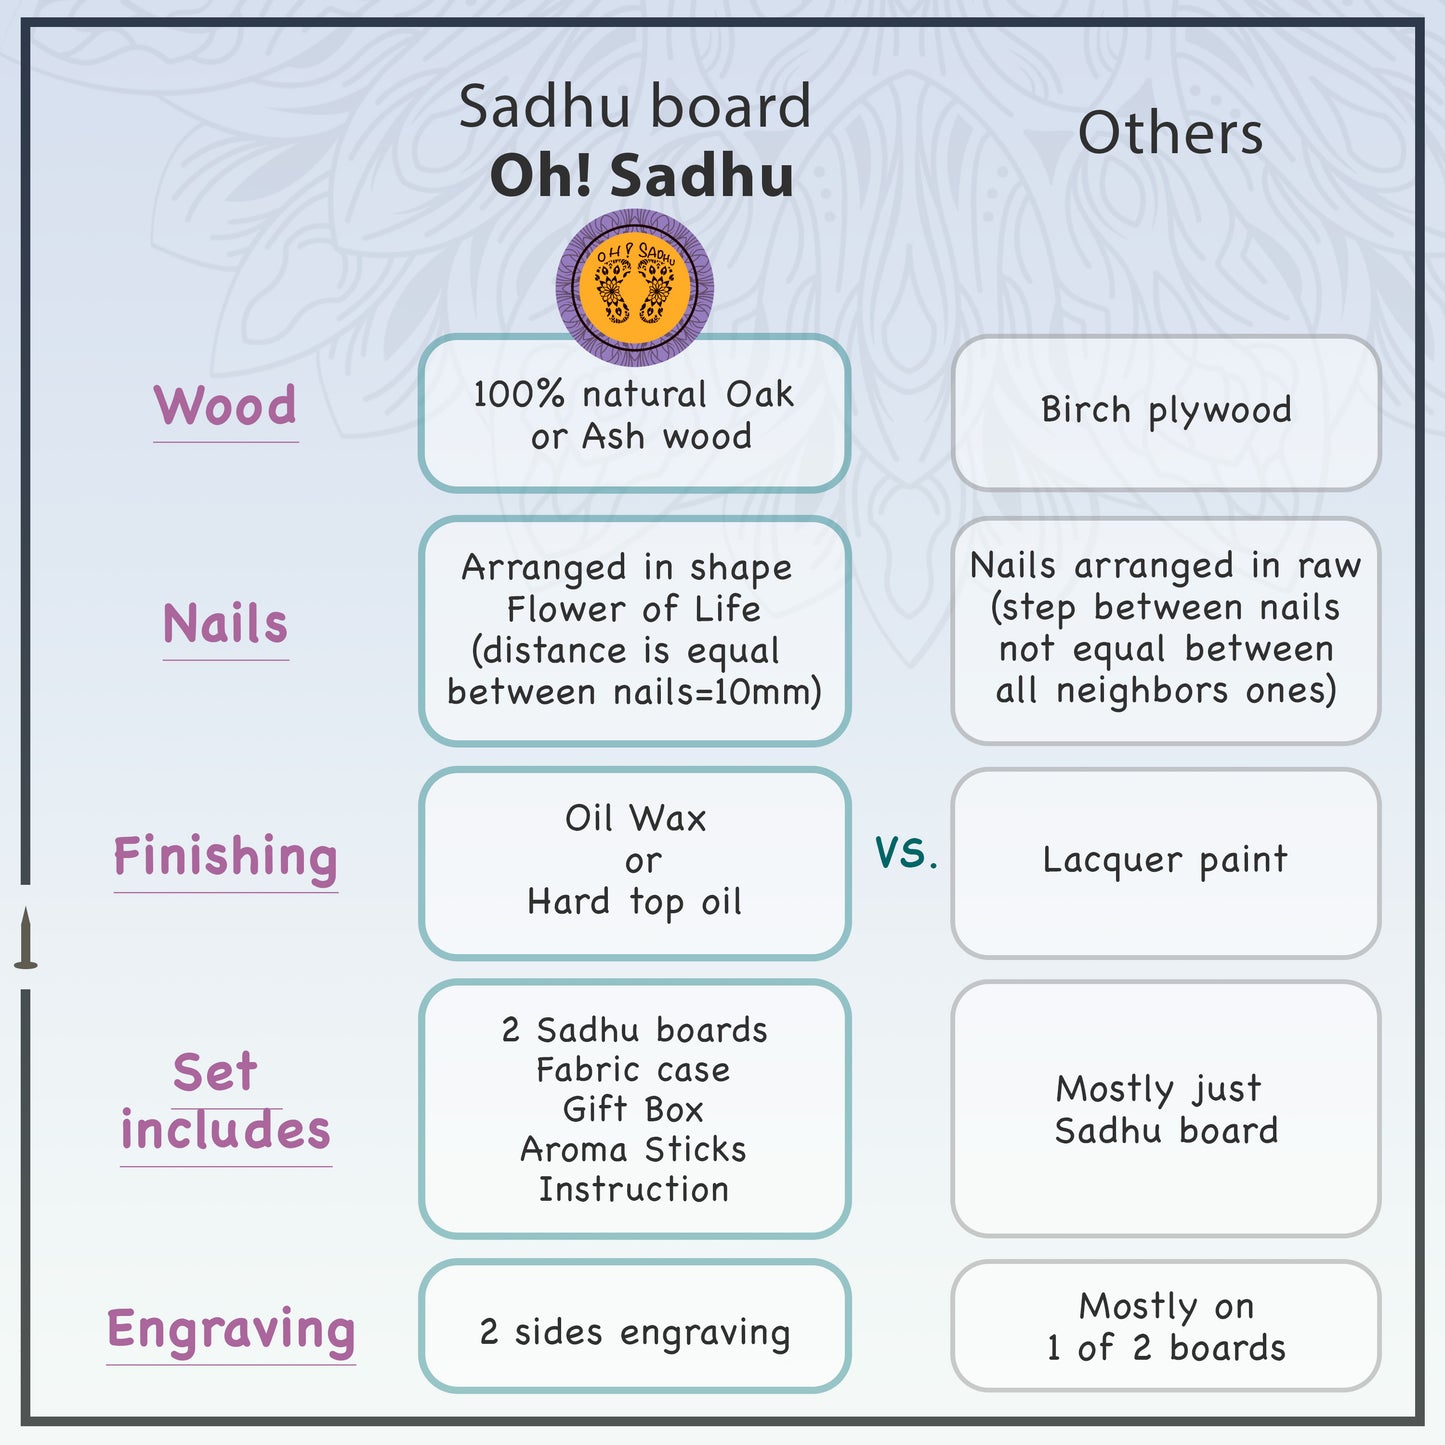 comparison table of Oh! Sadhu board advantages vs others